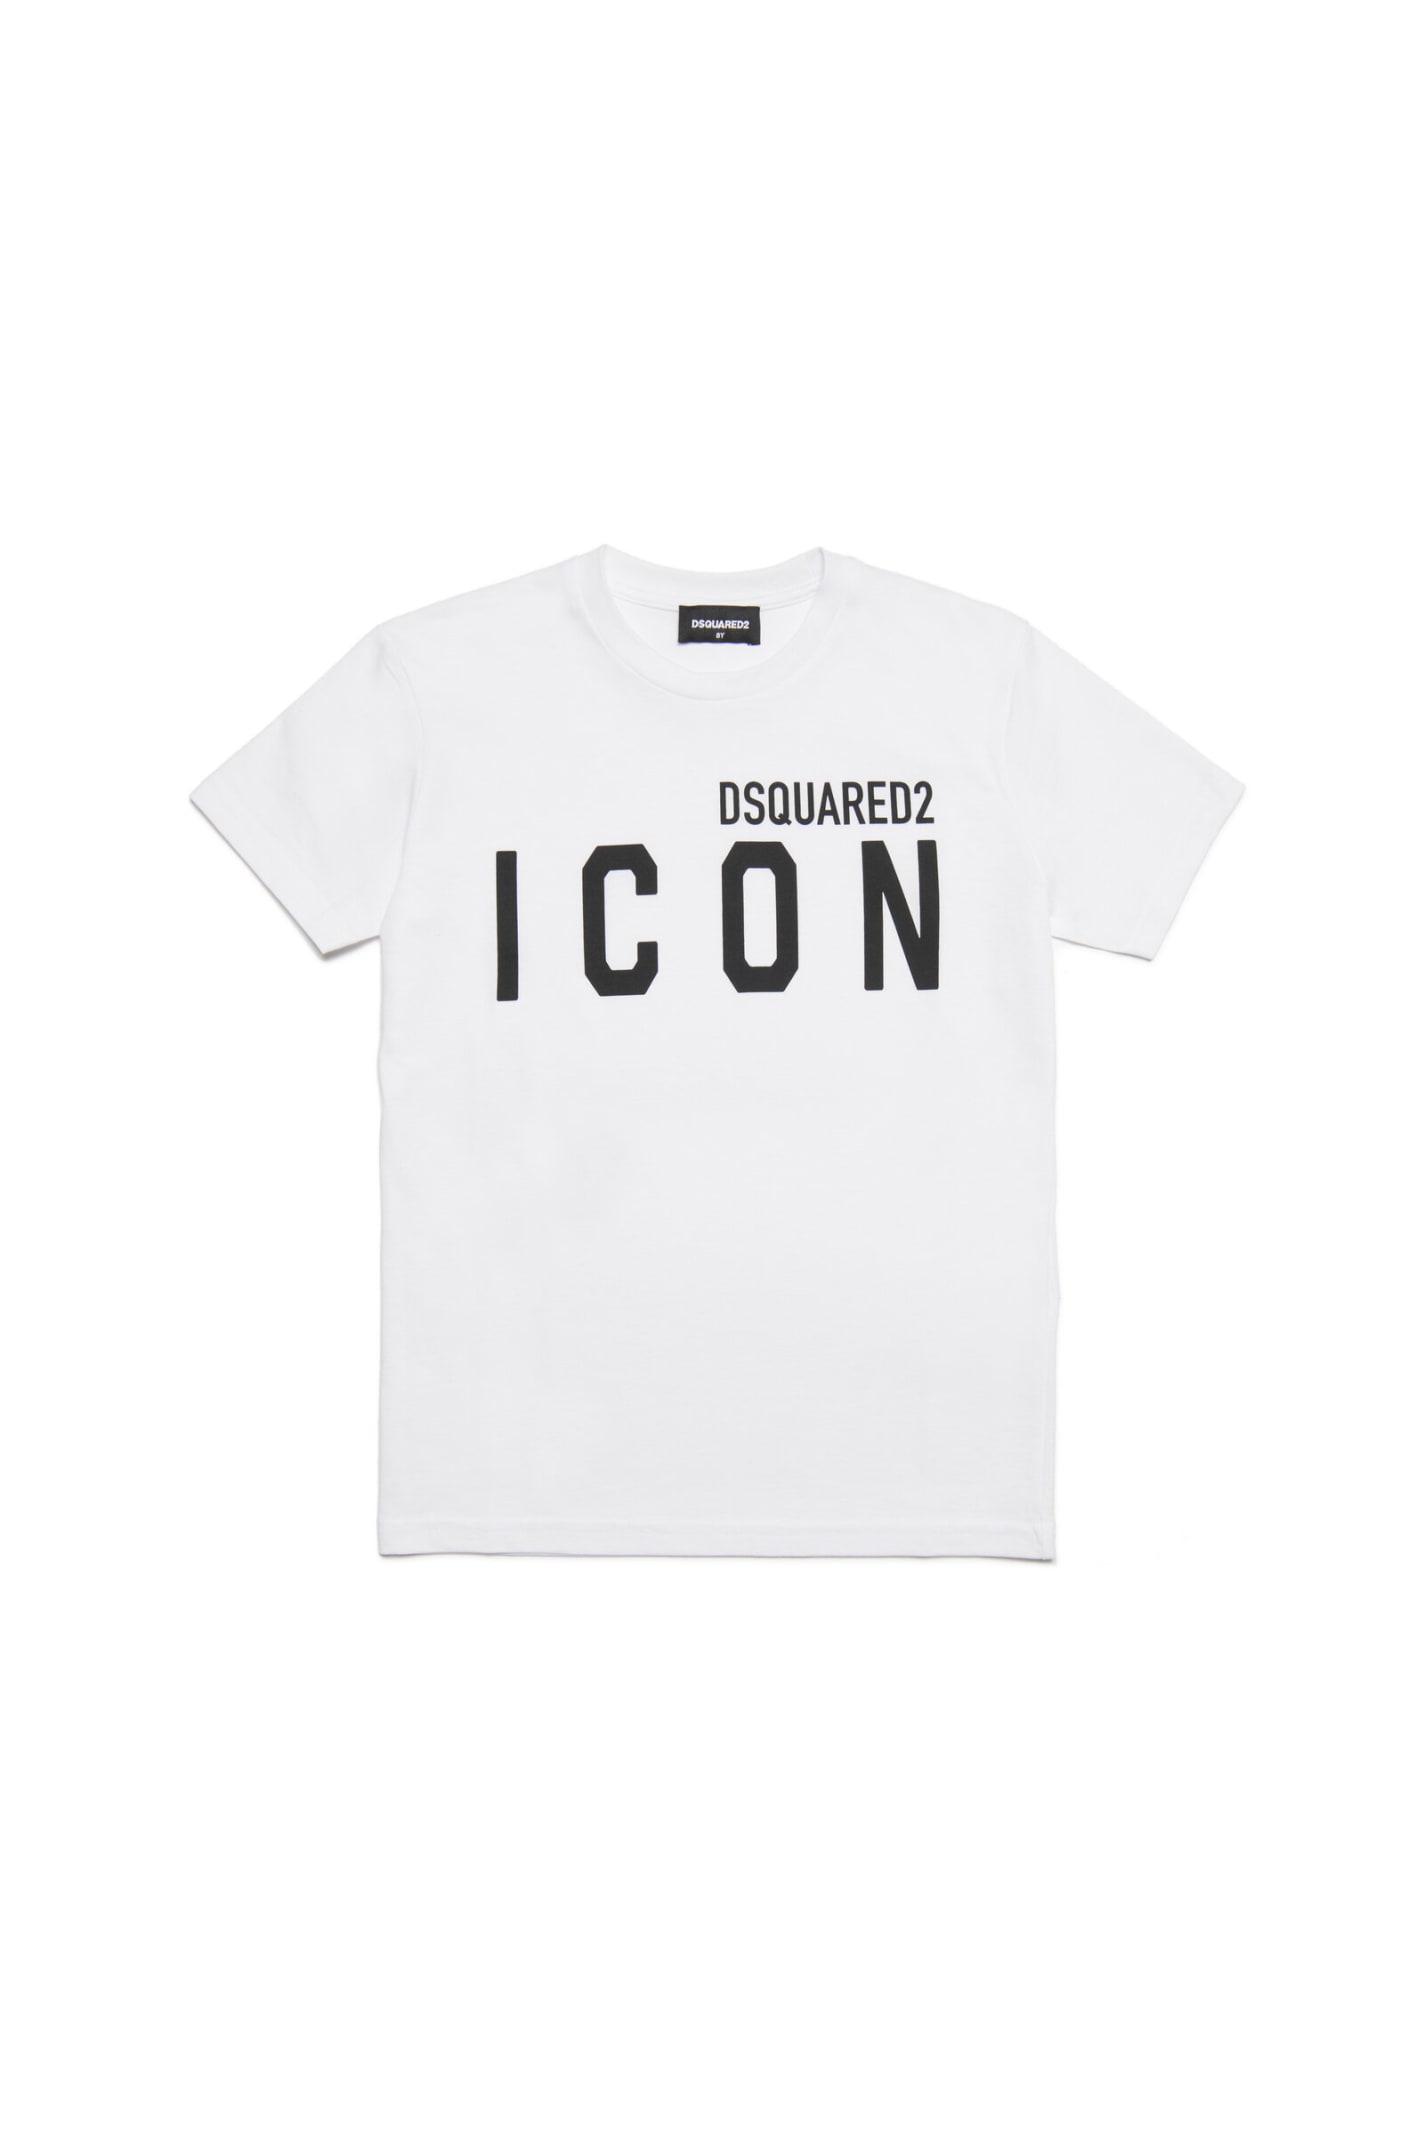 DSQUARED2 D2T872U COOL FIT-ICON T-SHIRT DSQUARED WHITE JERSEY T-SHIRT WITH ICON LOGO